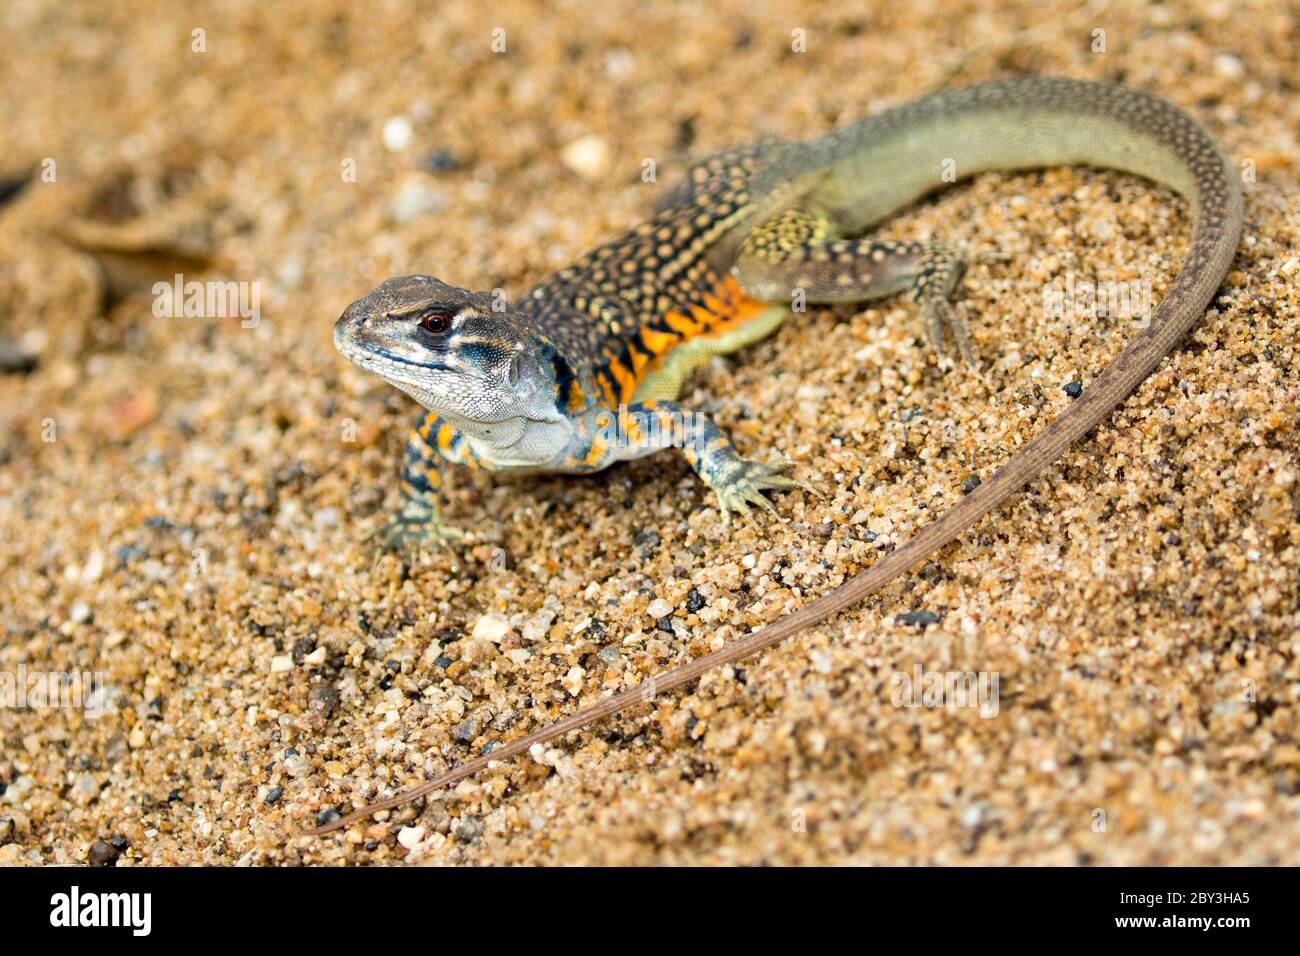 Image of Butterfly Agama Lizard (Leiolepis Cuvier) on the sand. Reptile Animal Stock Photo